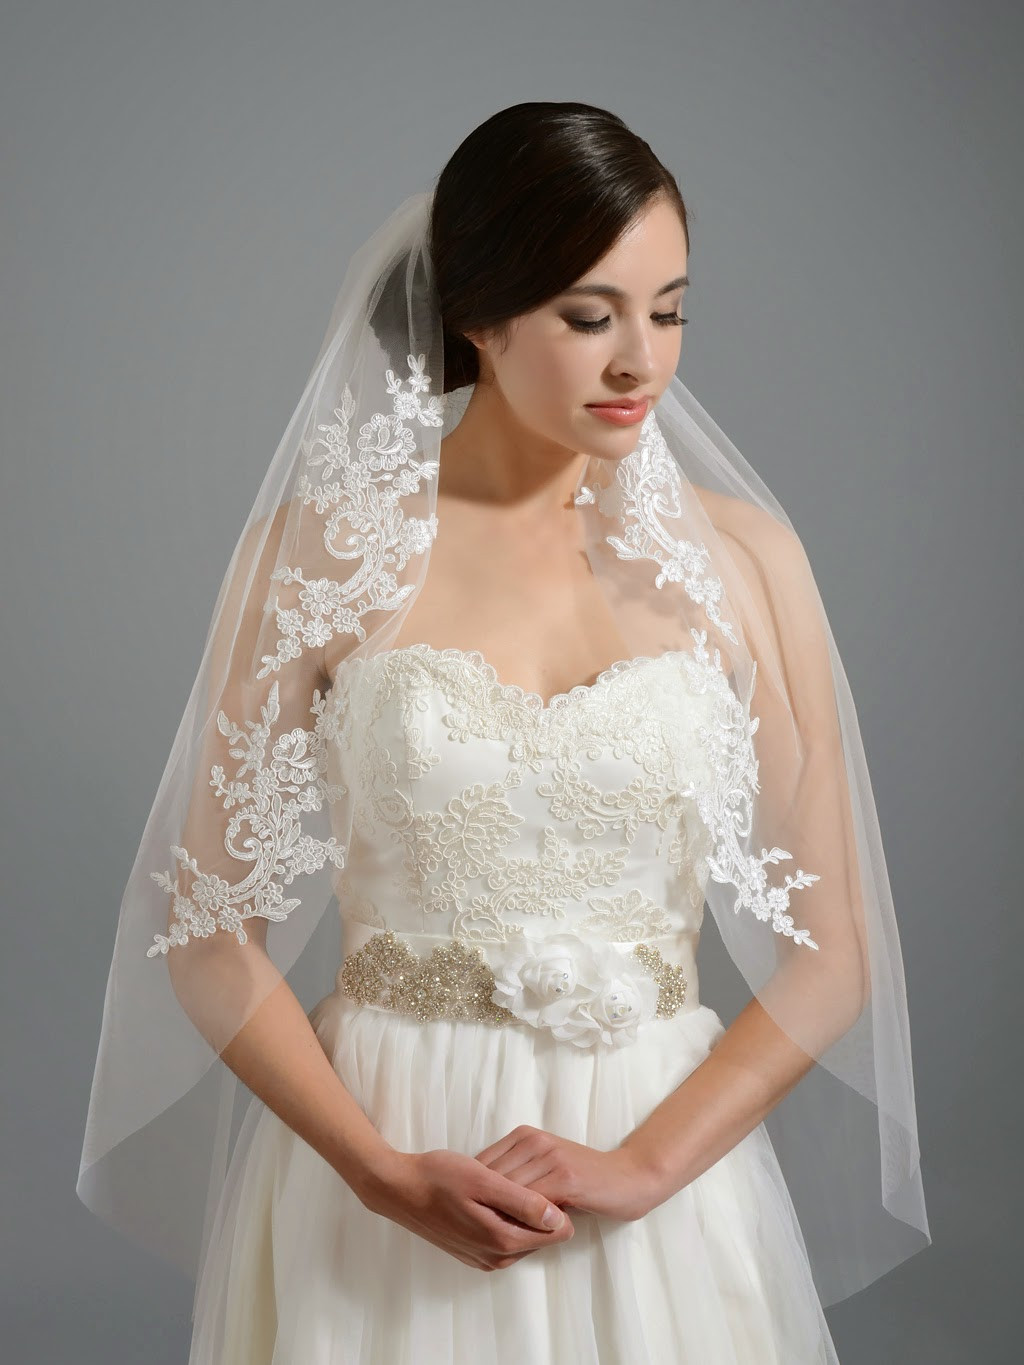 Veil In Wedding Fresh Wedding Veil How to Select the Perfect E